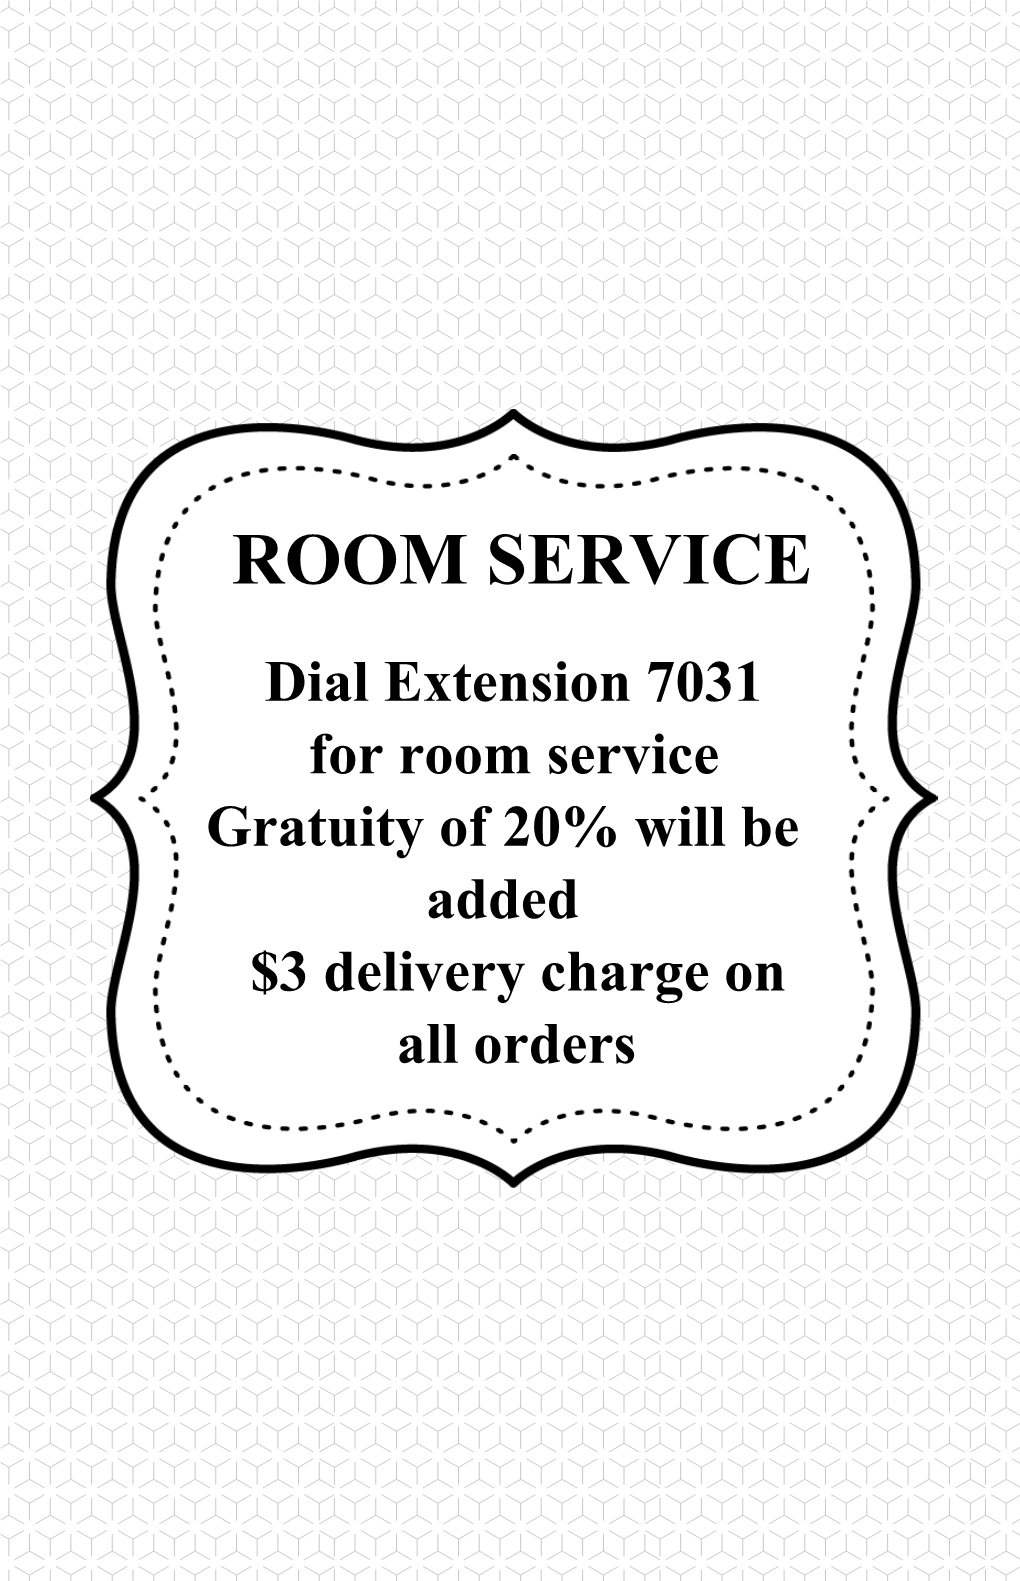 ROOM SERVICE Dial Extension 7031 for Room Service